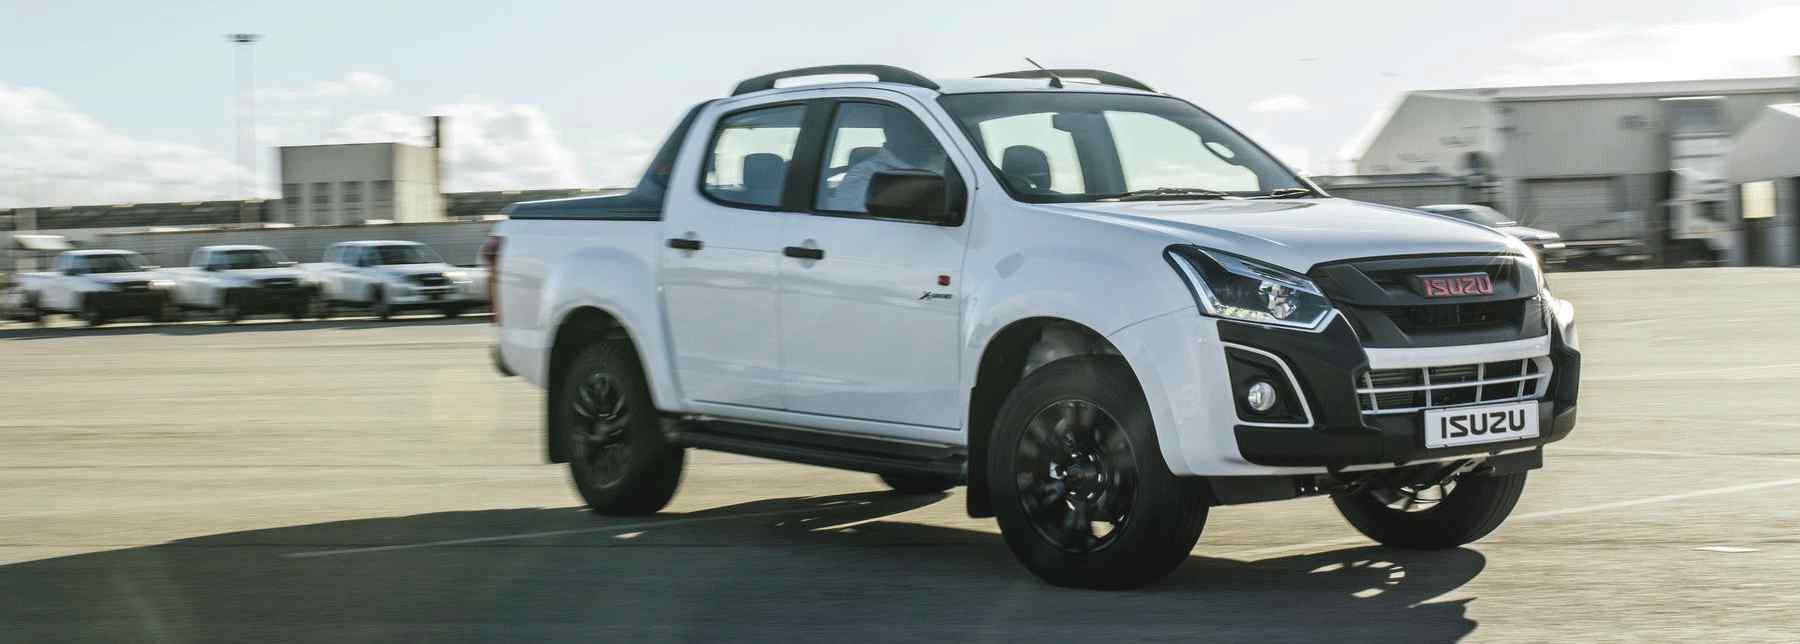 Special Edition Isuzu D-Max X-Rider now available